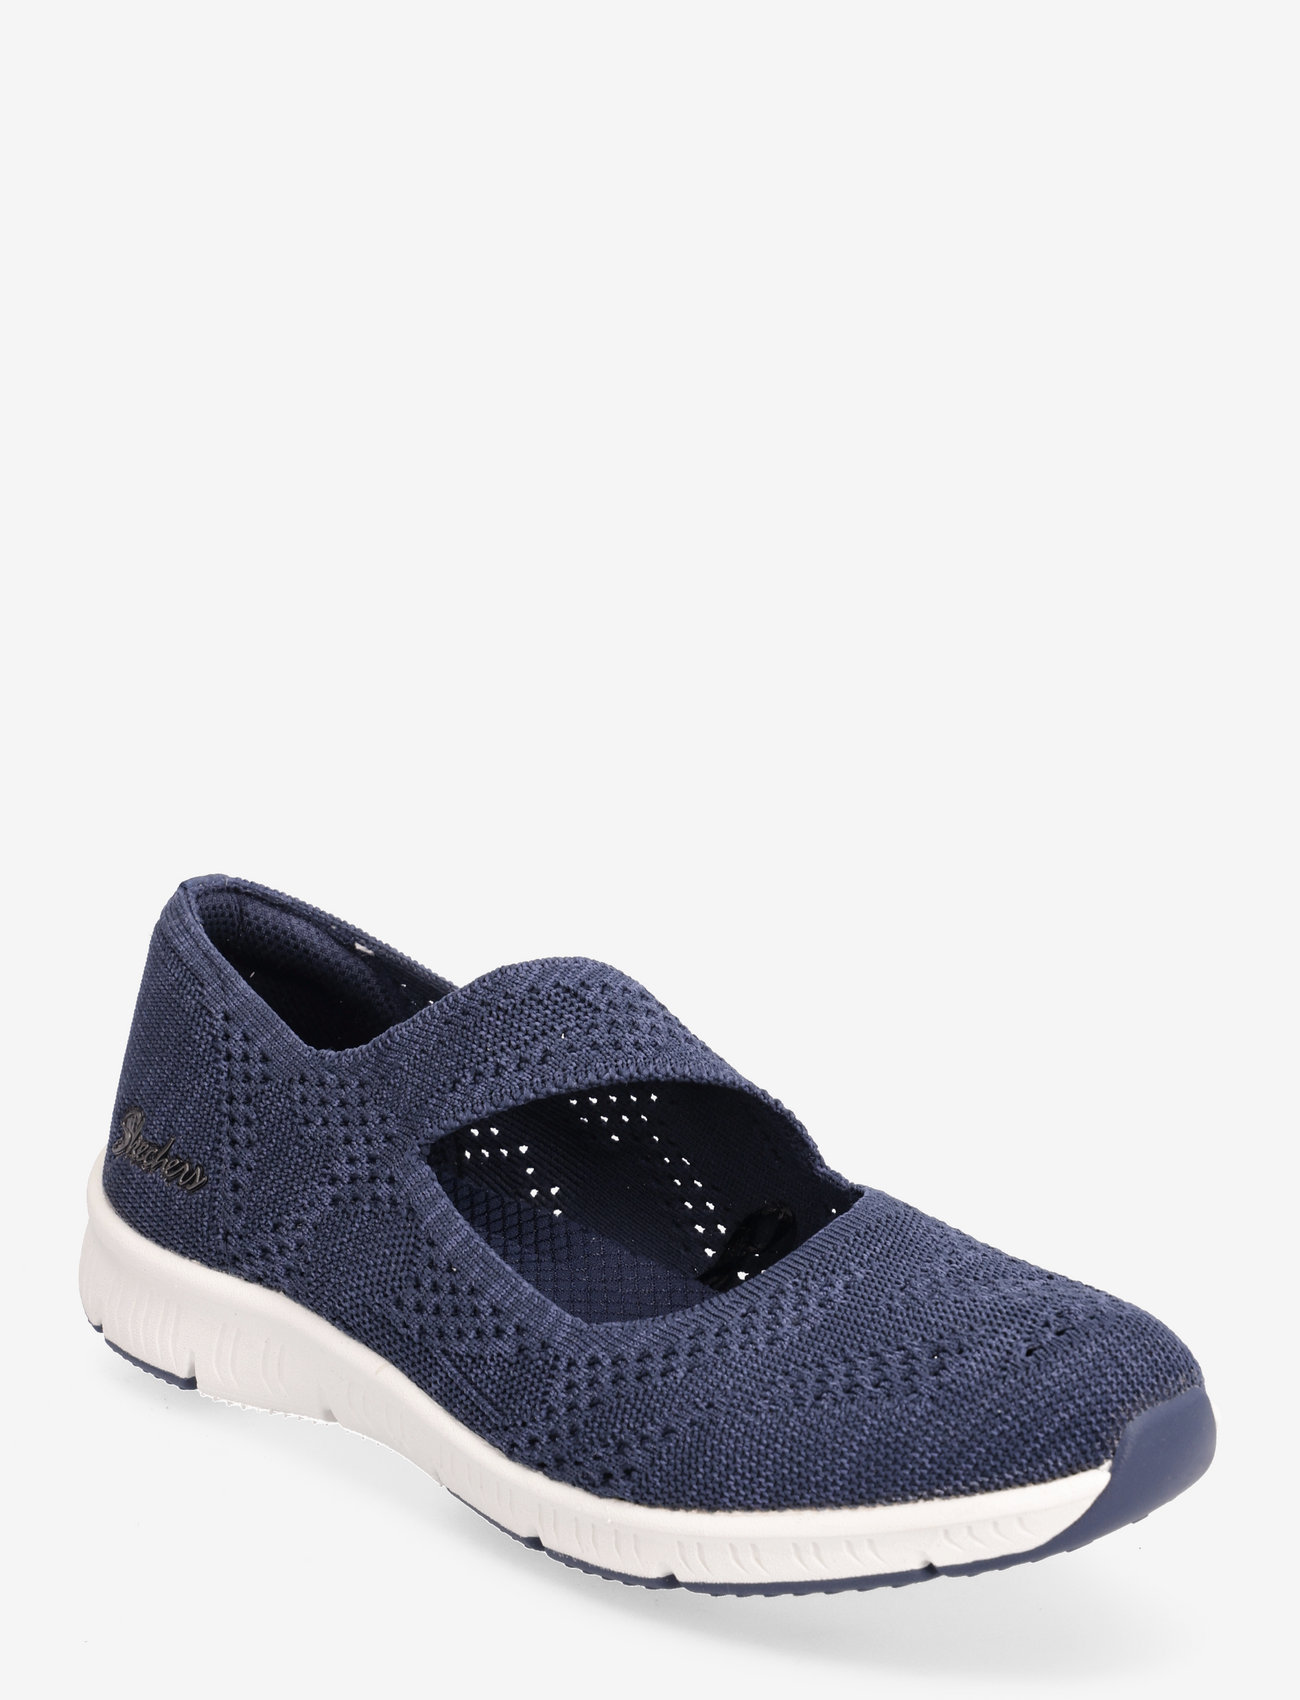 Skechers - Womens Be-Cool Endless Fun - festmode zu outlet-preisen - nvy navy - 0